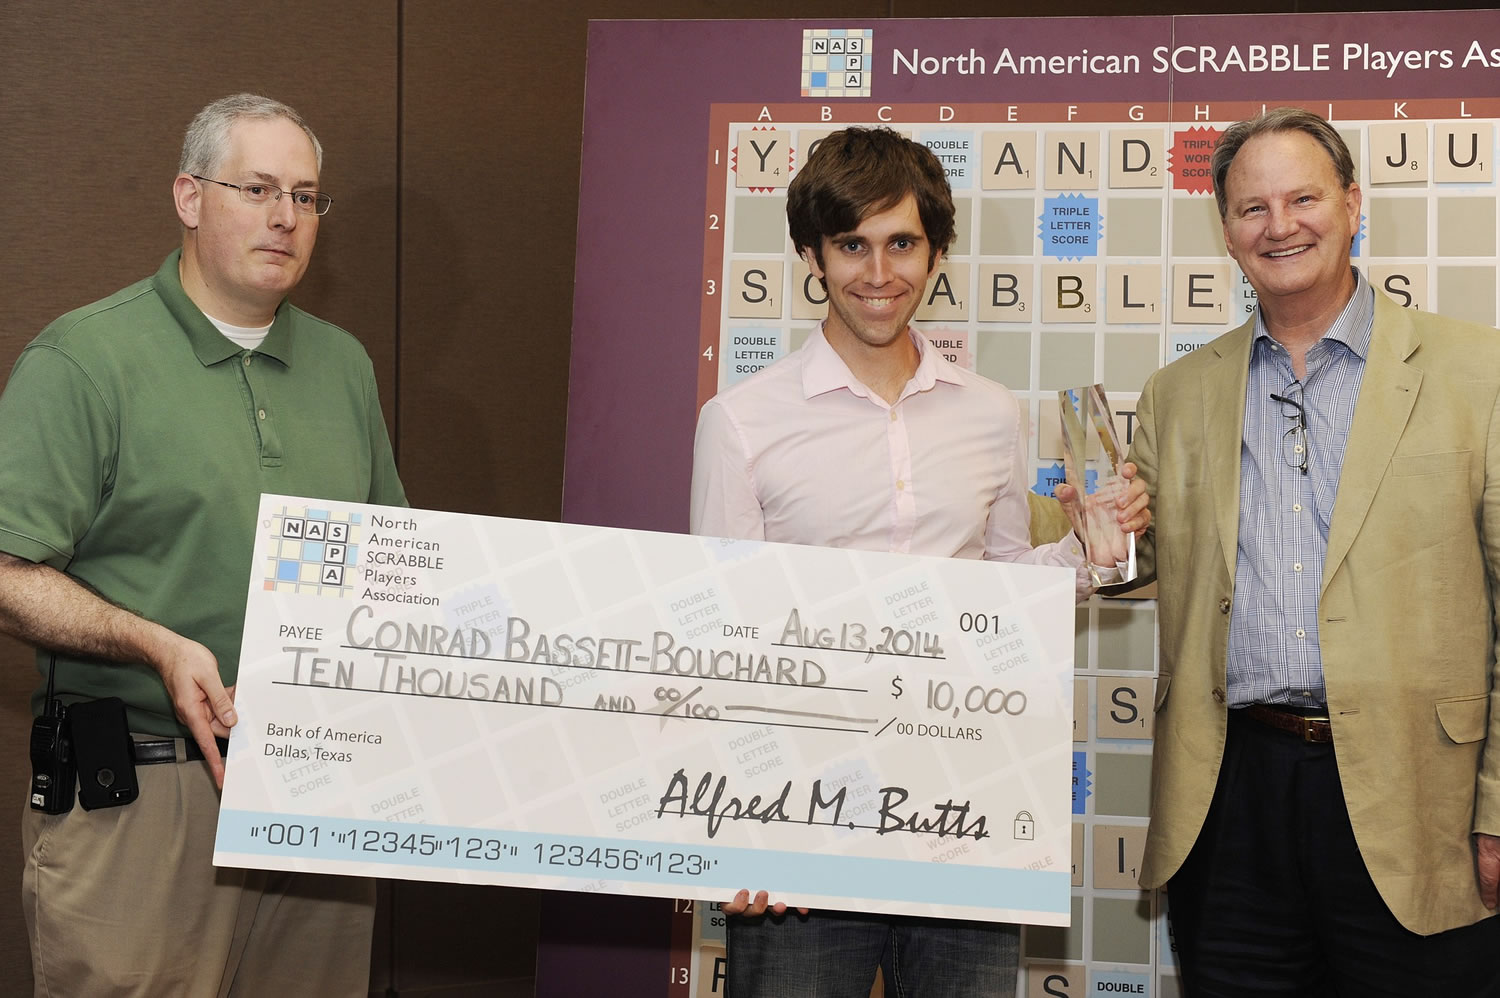 Dallas Johnson, from left, tour director of the North American Scrabble Players Association, holds a check for Conrad Bassett-Bouchard, of Portland, as Chris Cree, co-president of NASPA, stands alongside the champion during the awards ceremony of the National Scrabble Championship, Wednesday, Aug.